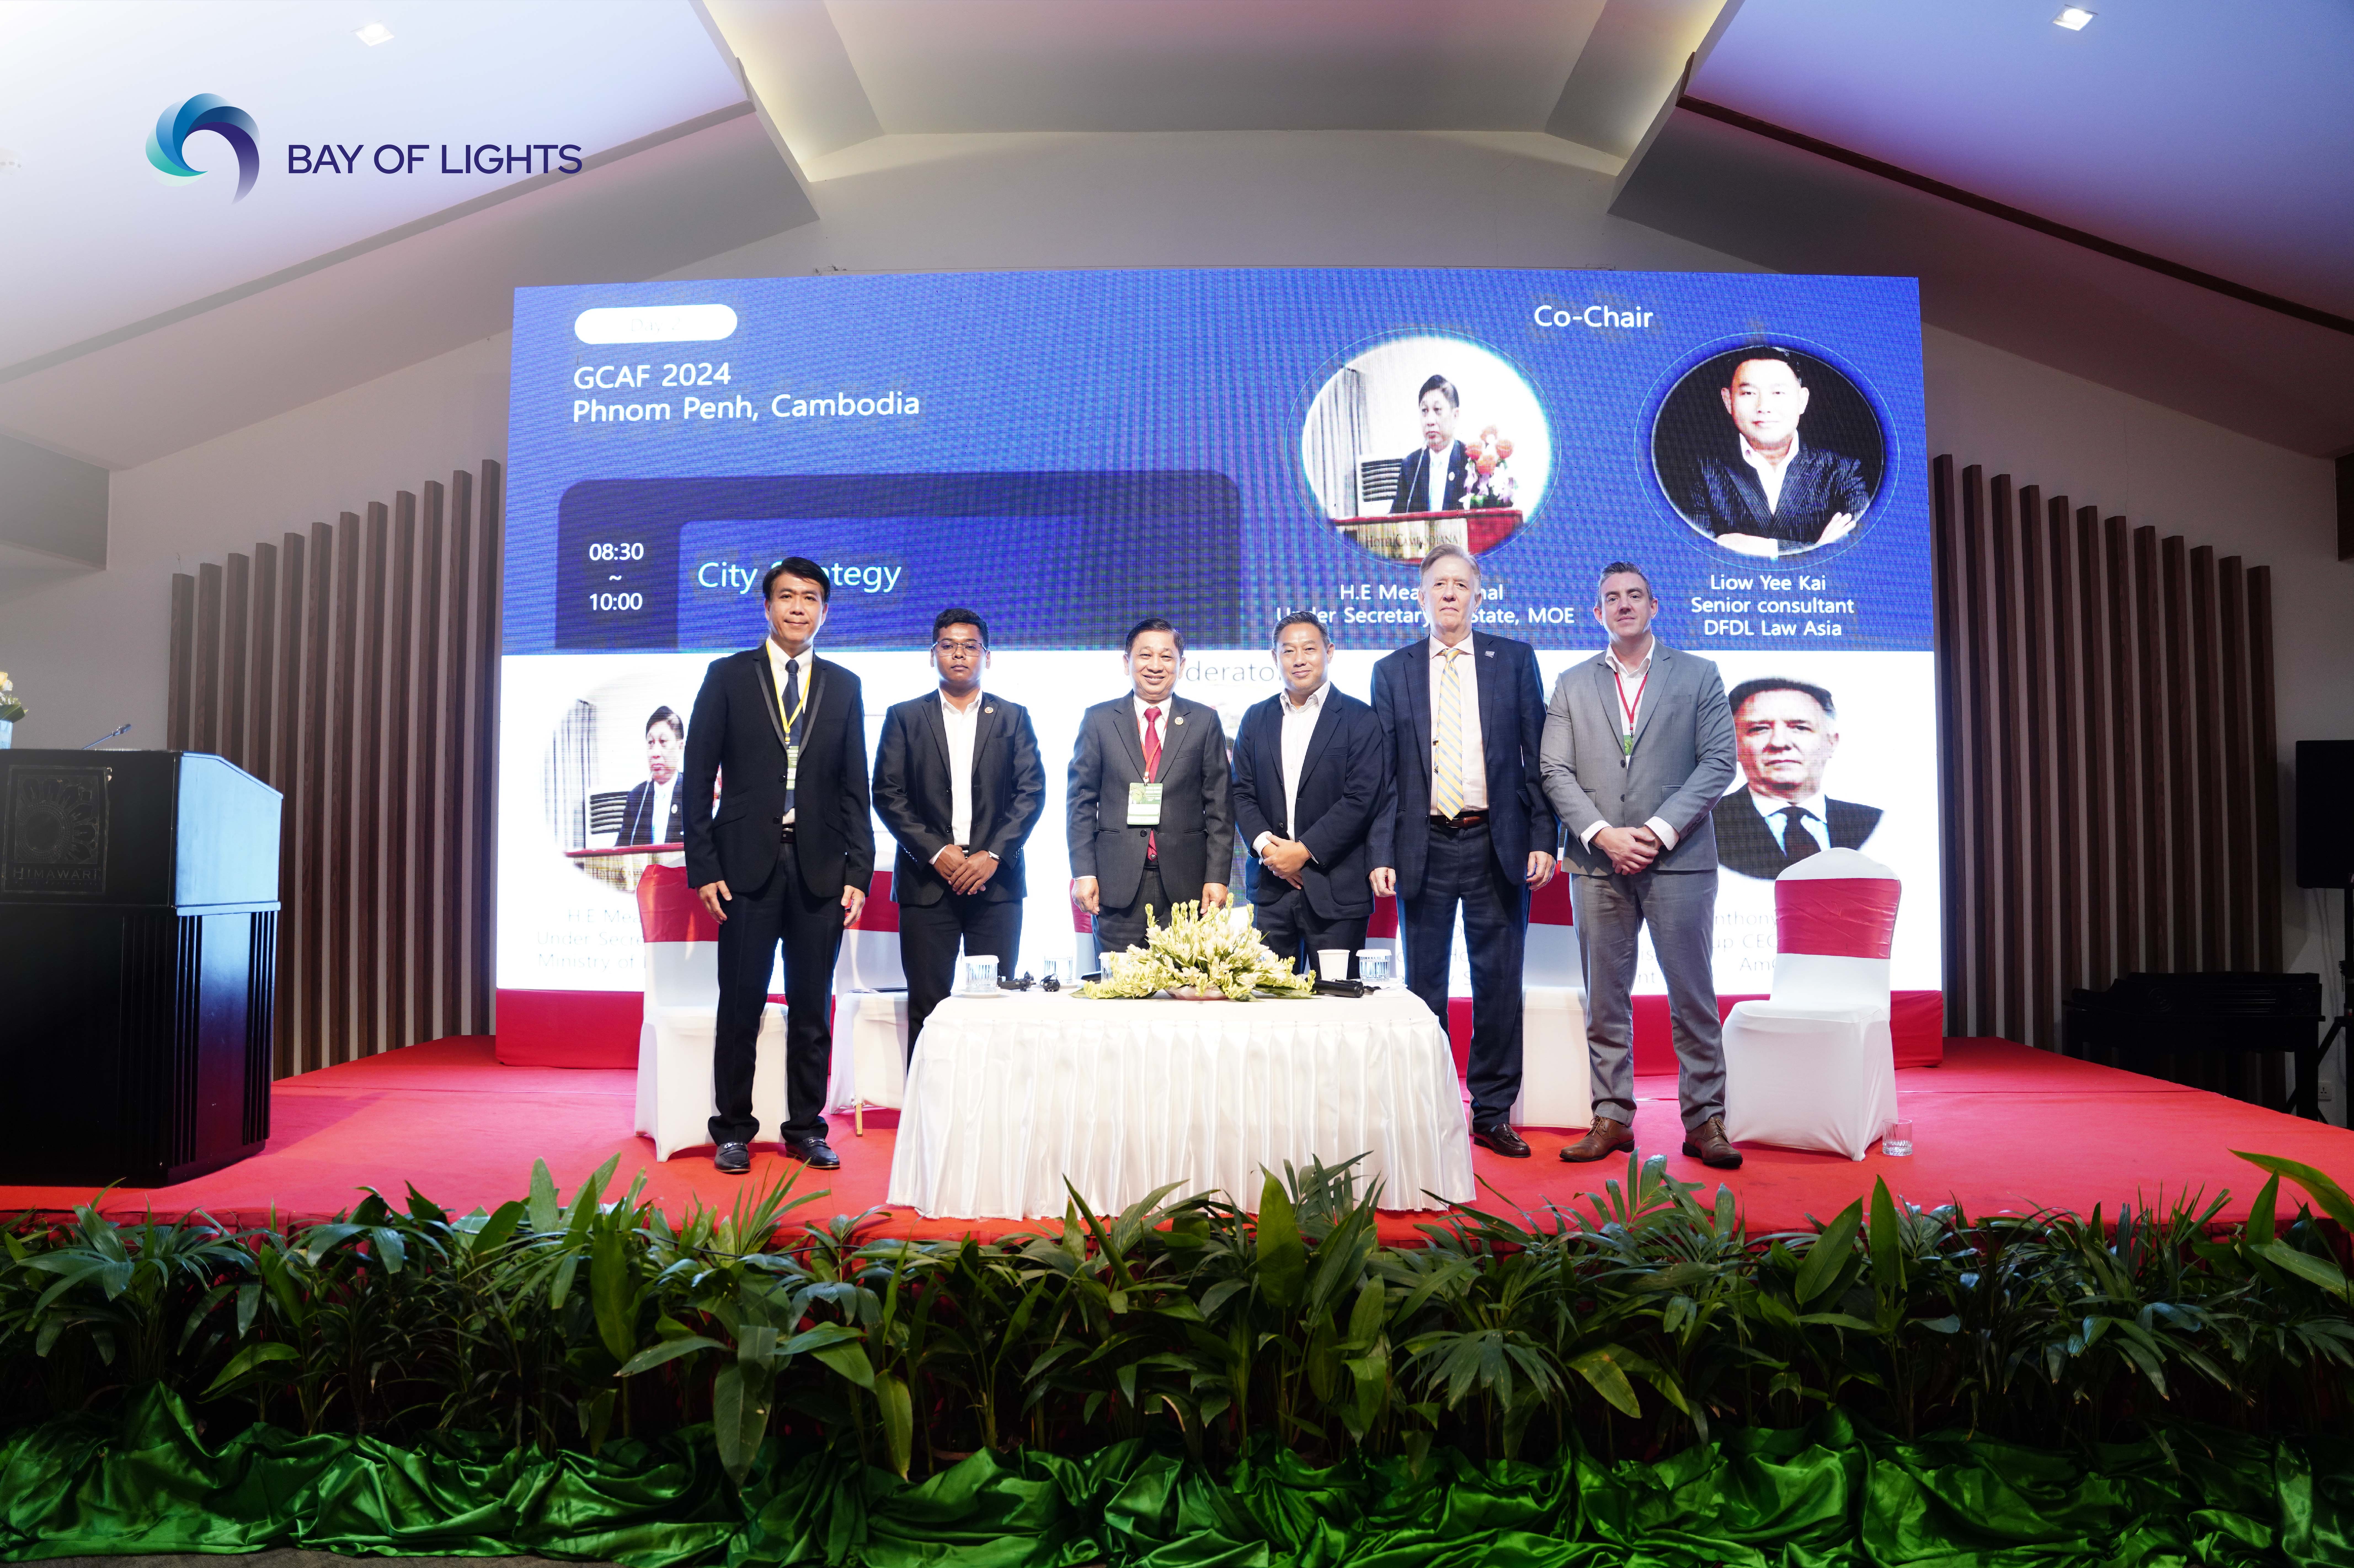 Bay of Lights project showcased at the Global Climate Action Forum, a testament to Cambodia